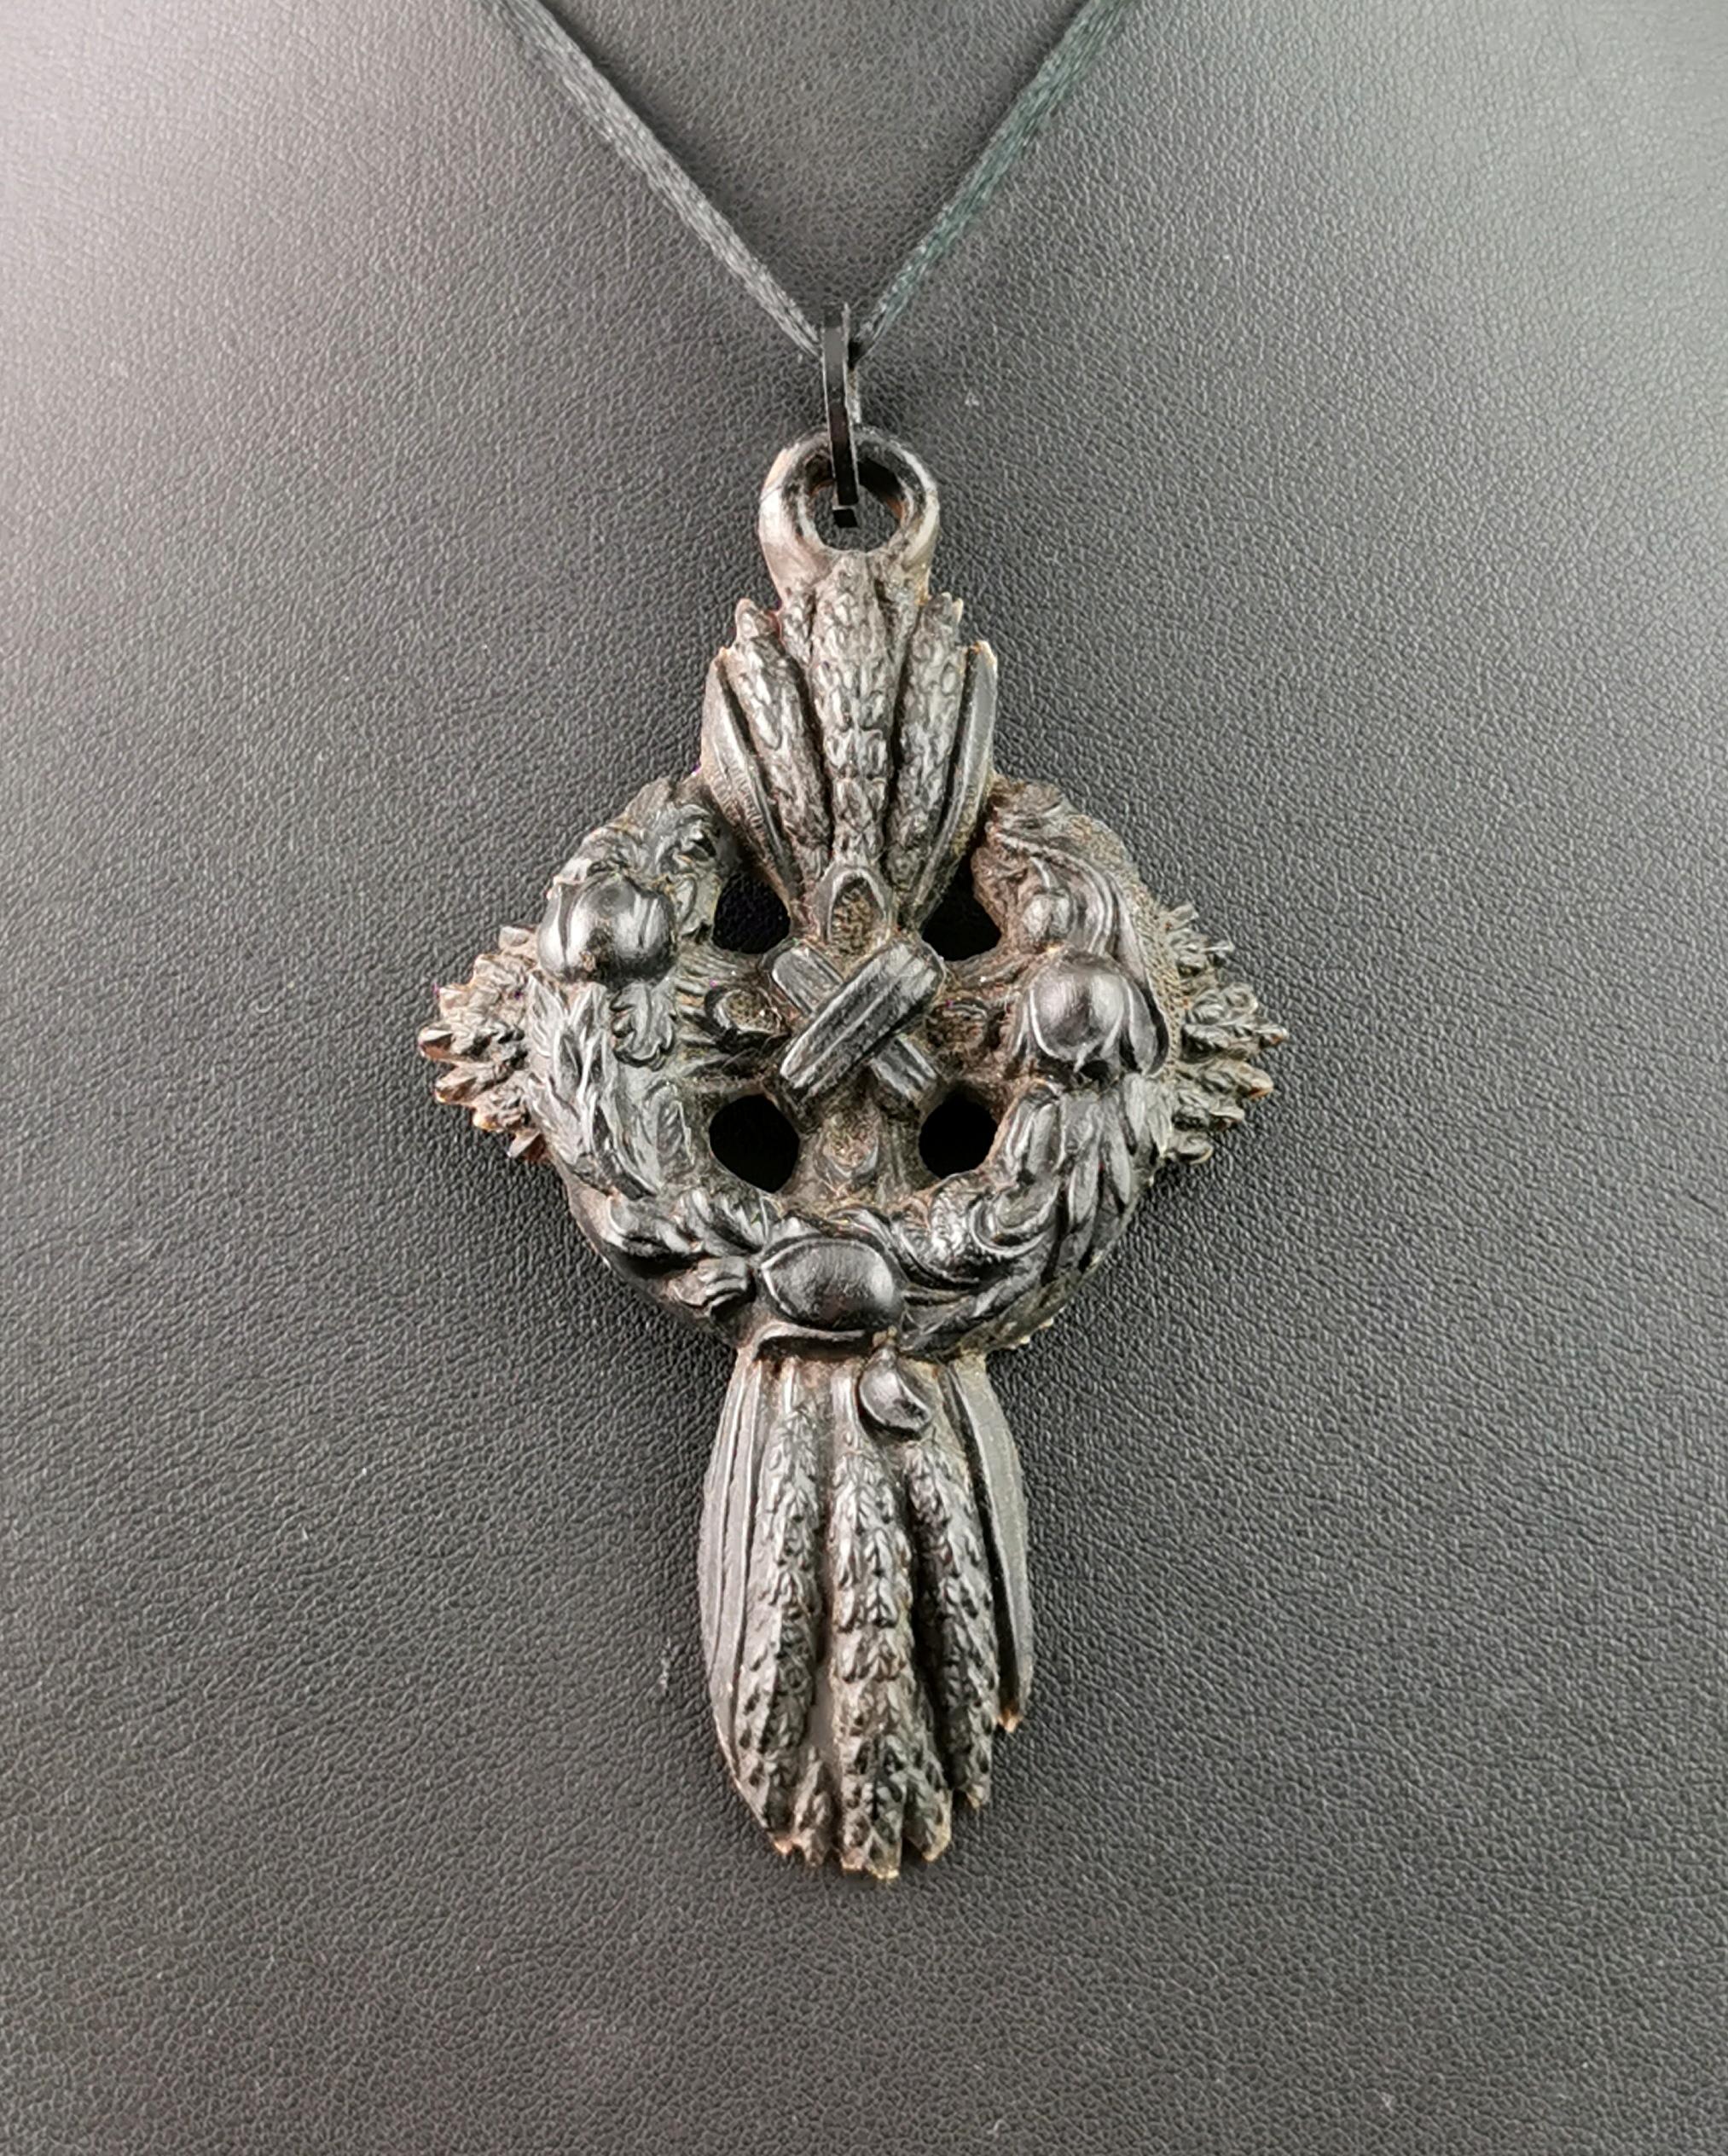 A beautiful antique, Victorian era mourning Cross pendant.

So much attention to detail the cross is made up from sheaths of wheat with a central wreath featuring tulips.

The cross is relatively large and has a black japanned loop from the top for